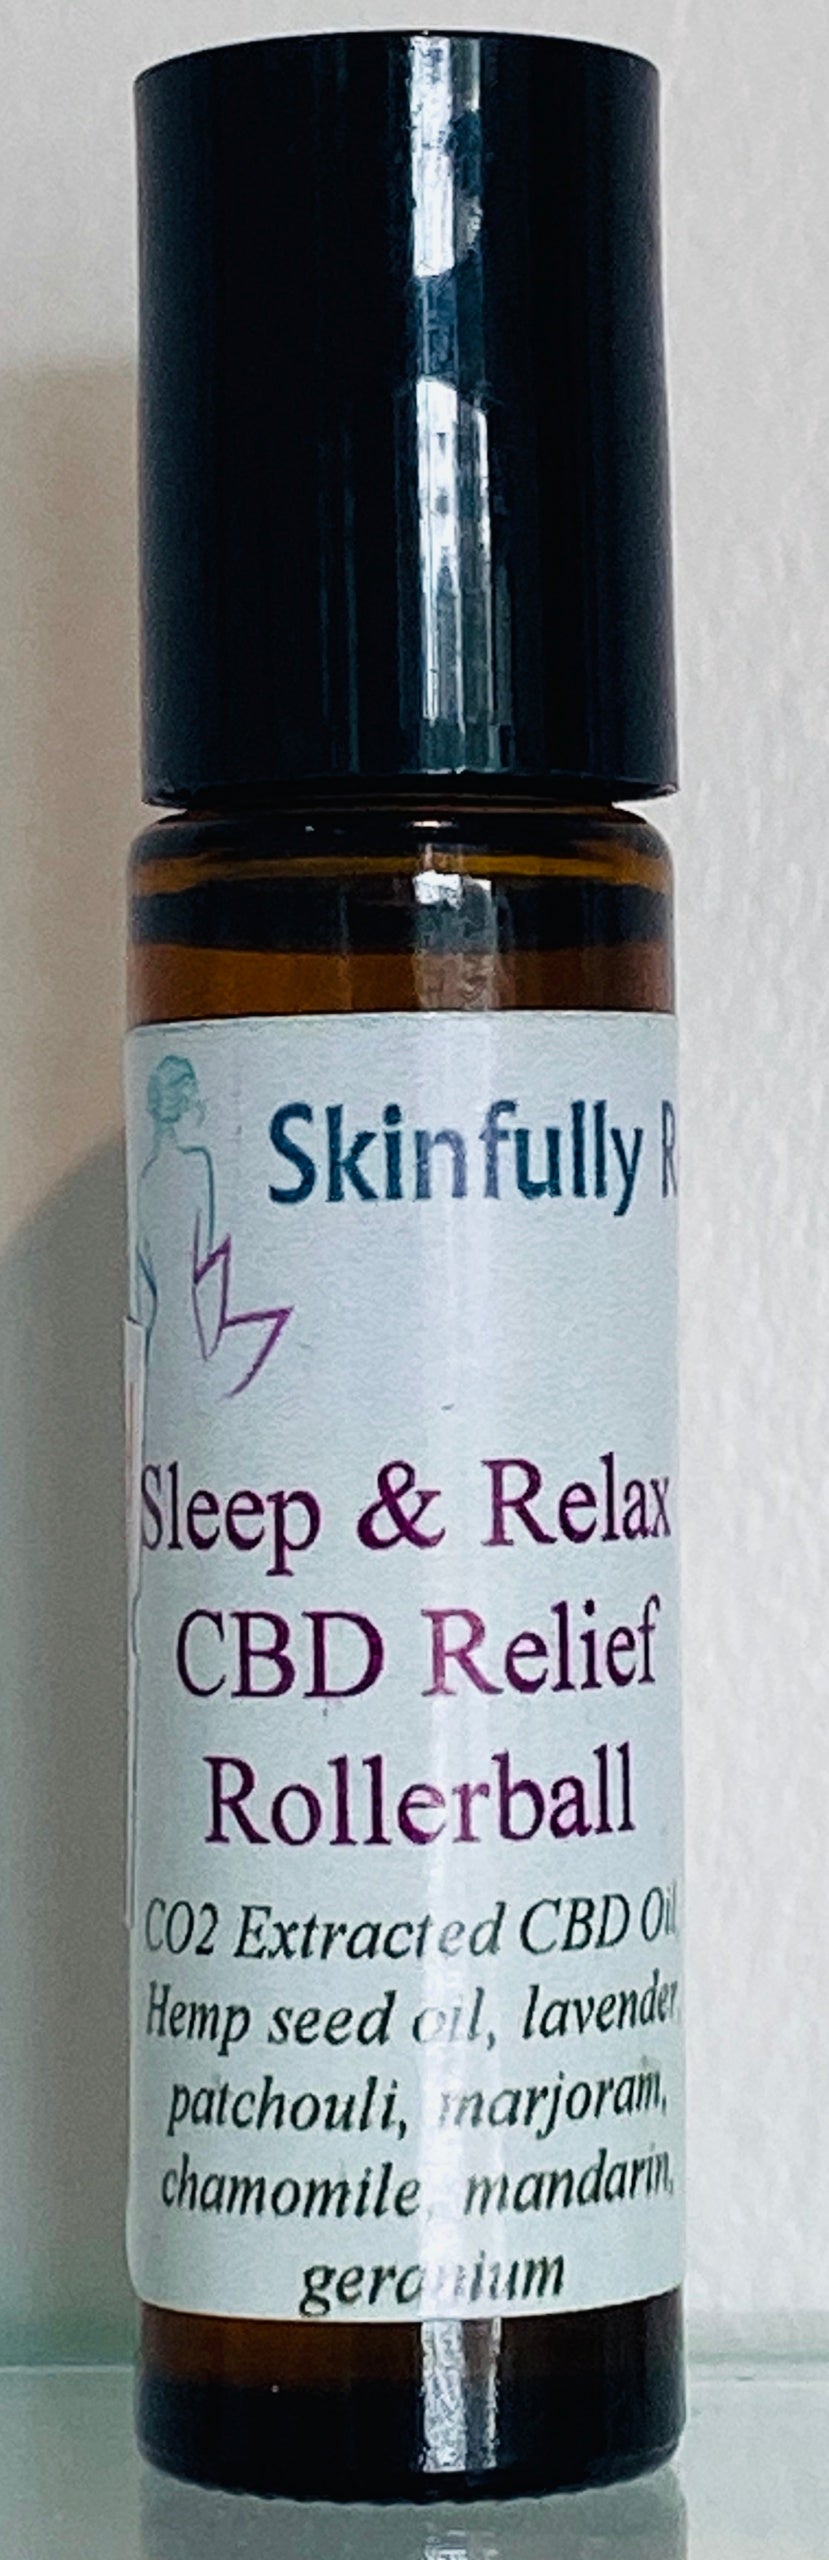 Sleep and Relax CBD Relief Rollerball 250mg